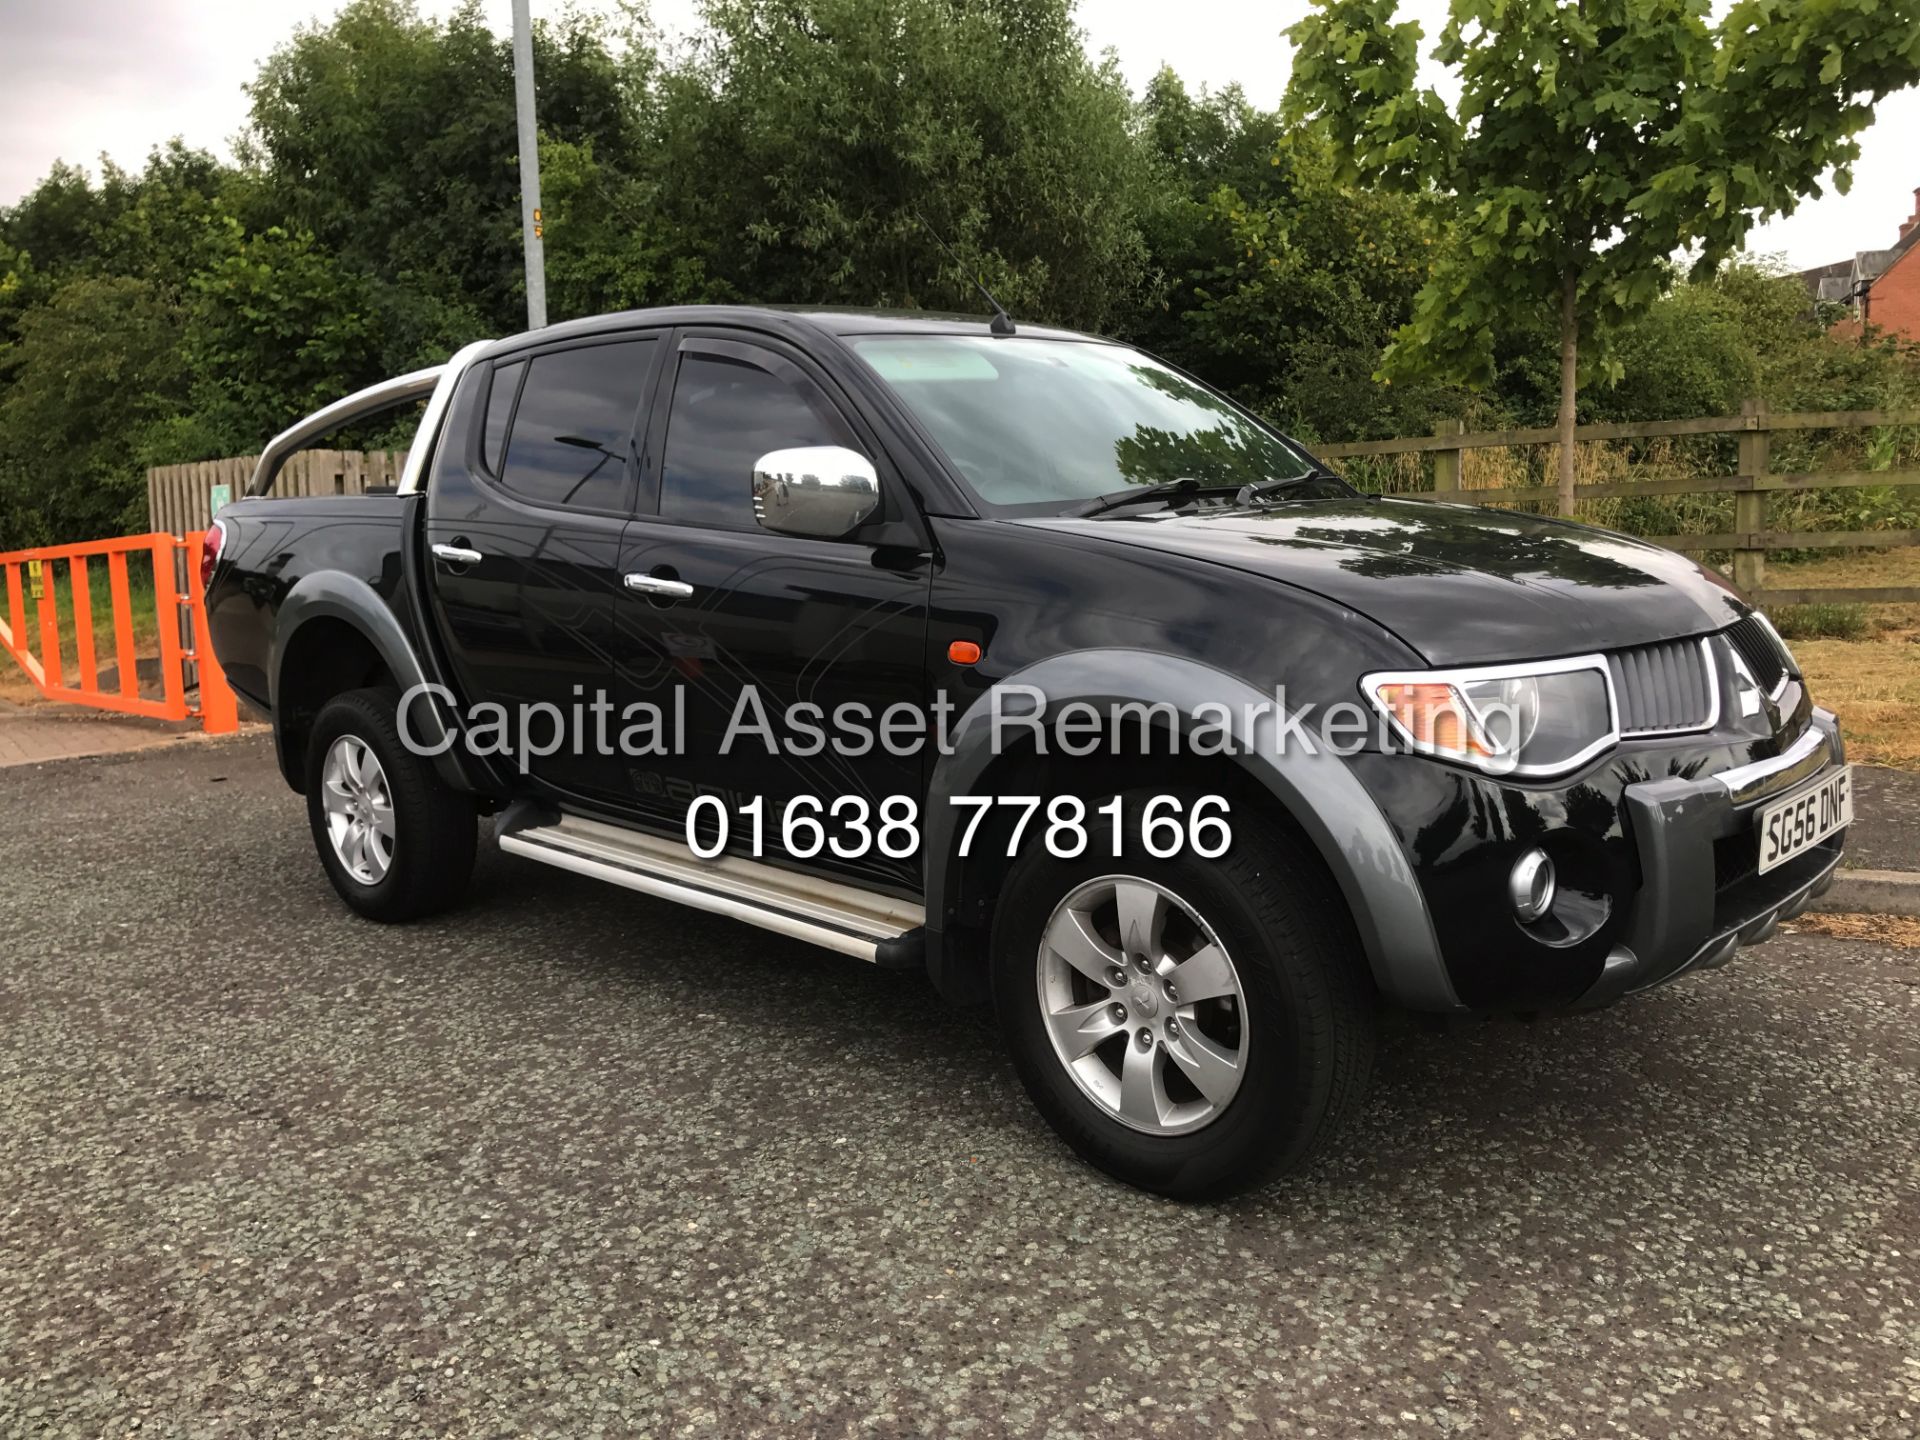 On Sale MITSUBISHI L200 "ANIMAL" 2.5DID "AUTO" DOUBLE CAB PICK UP -BLACK EDITION LOW MILES LEATHER - Image 12 of 22